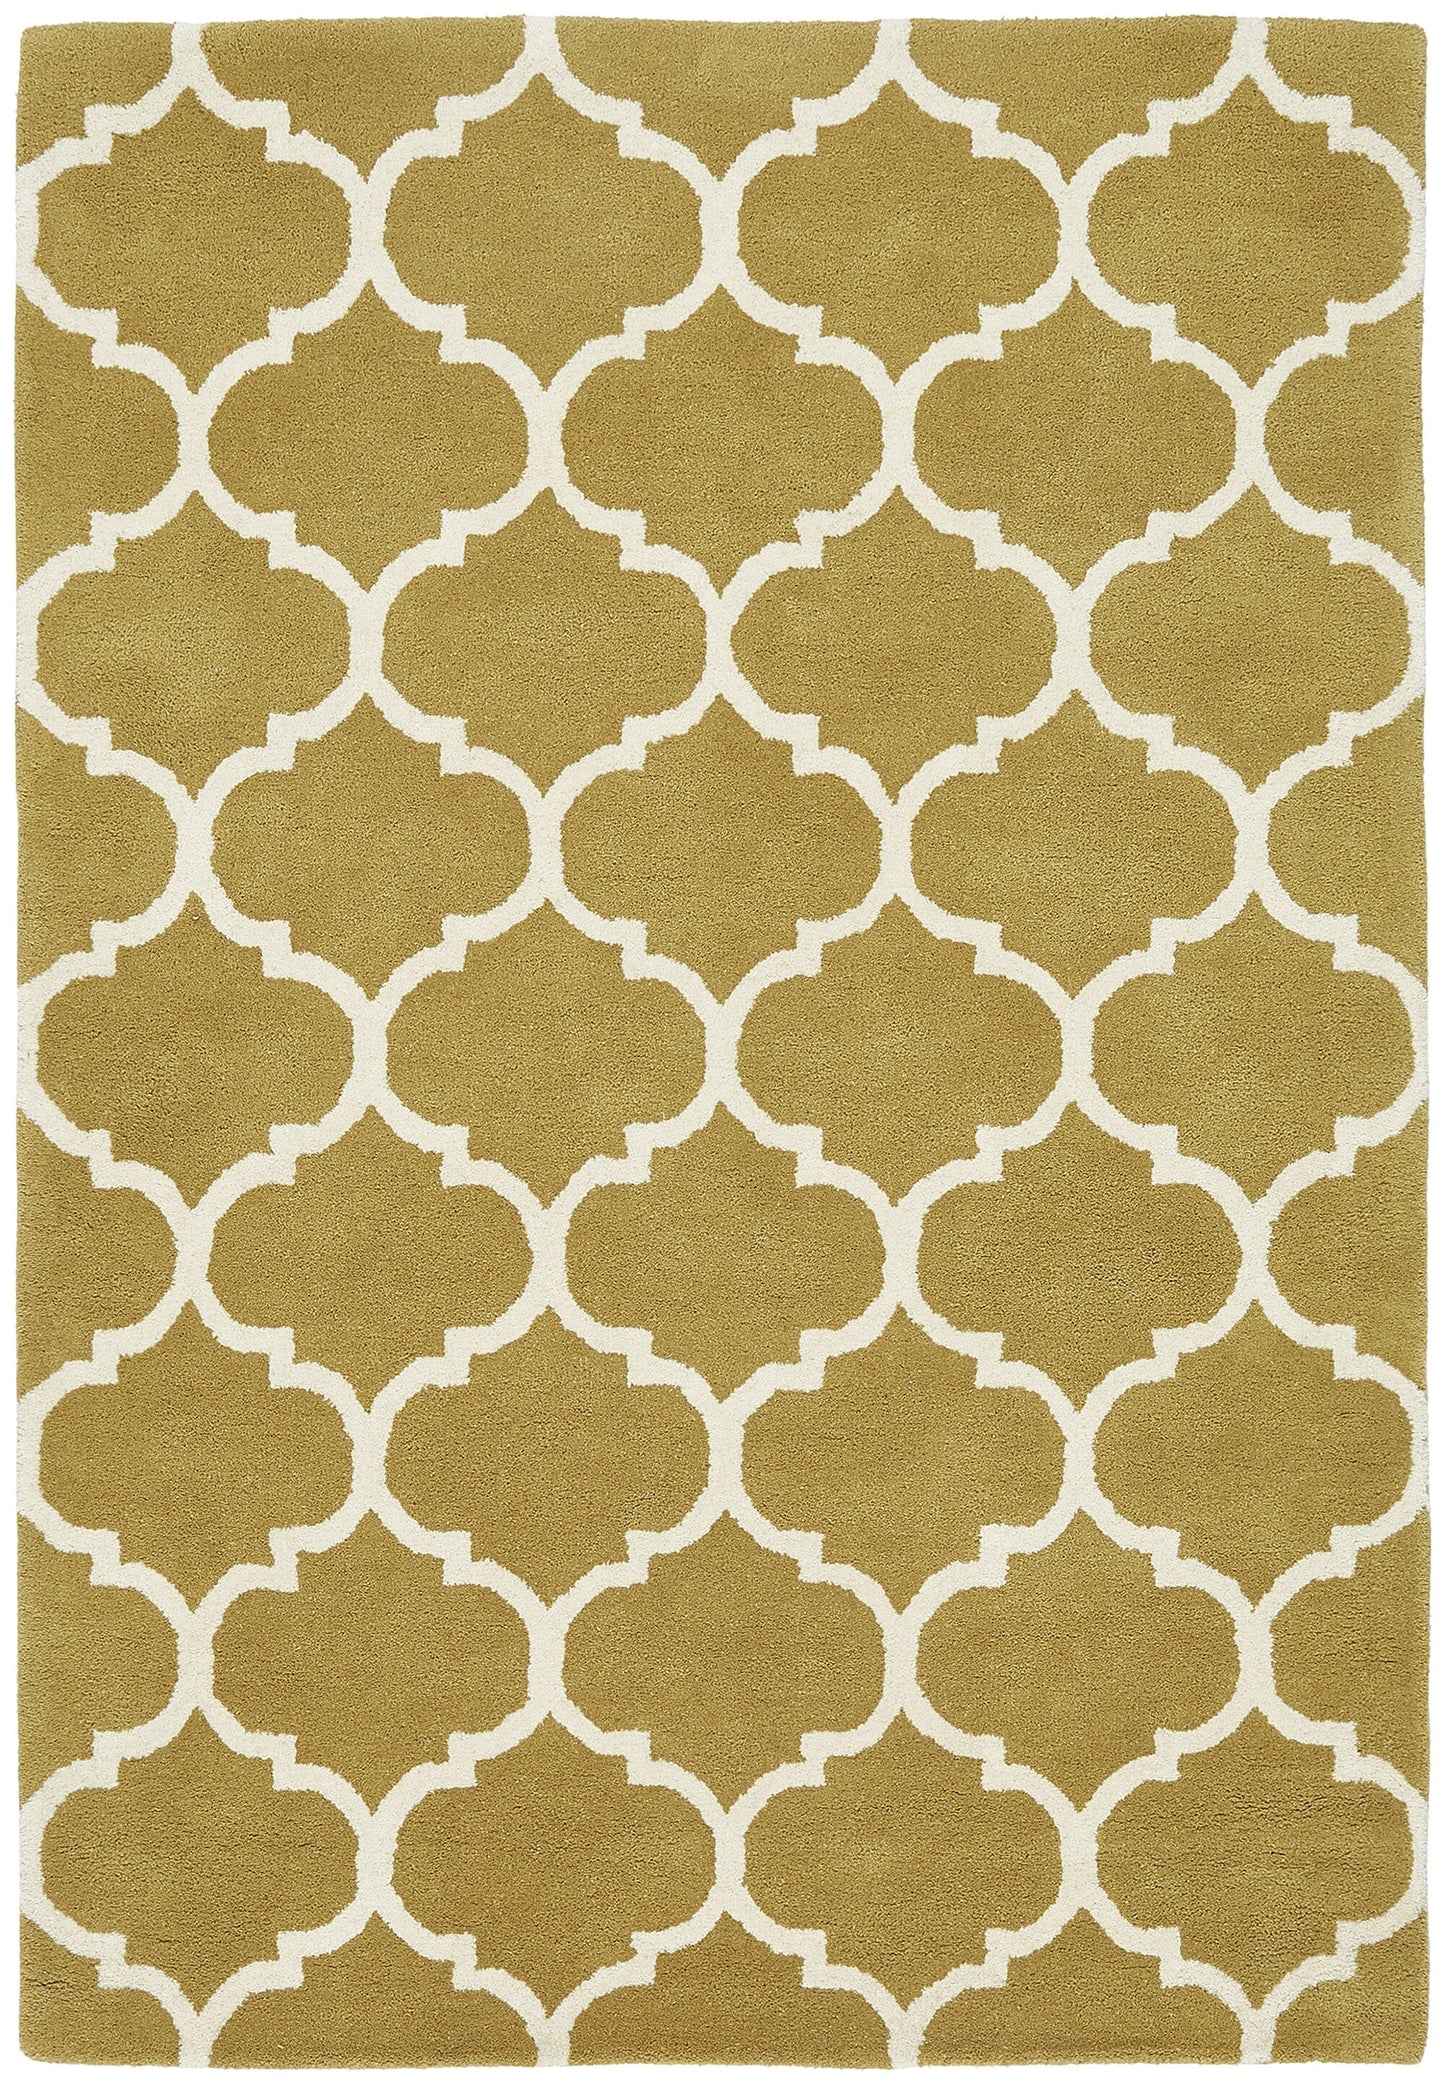 Asiatic Carpets Albany Handtufted Rug Ogee Ochre - 200 x 290cm